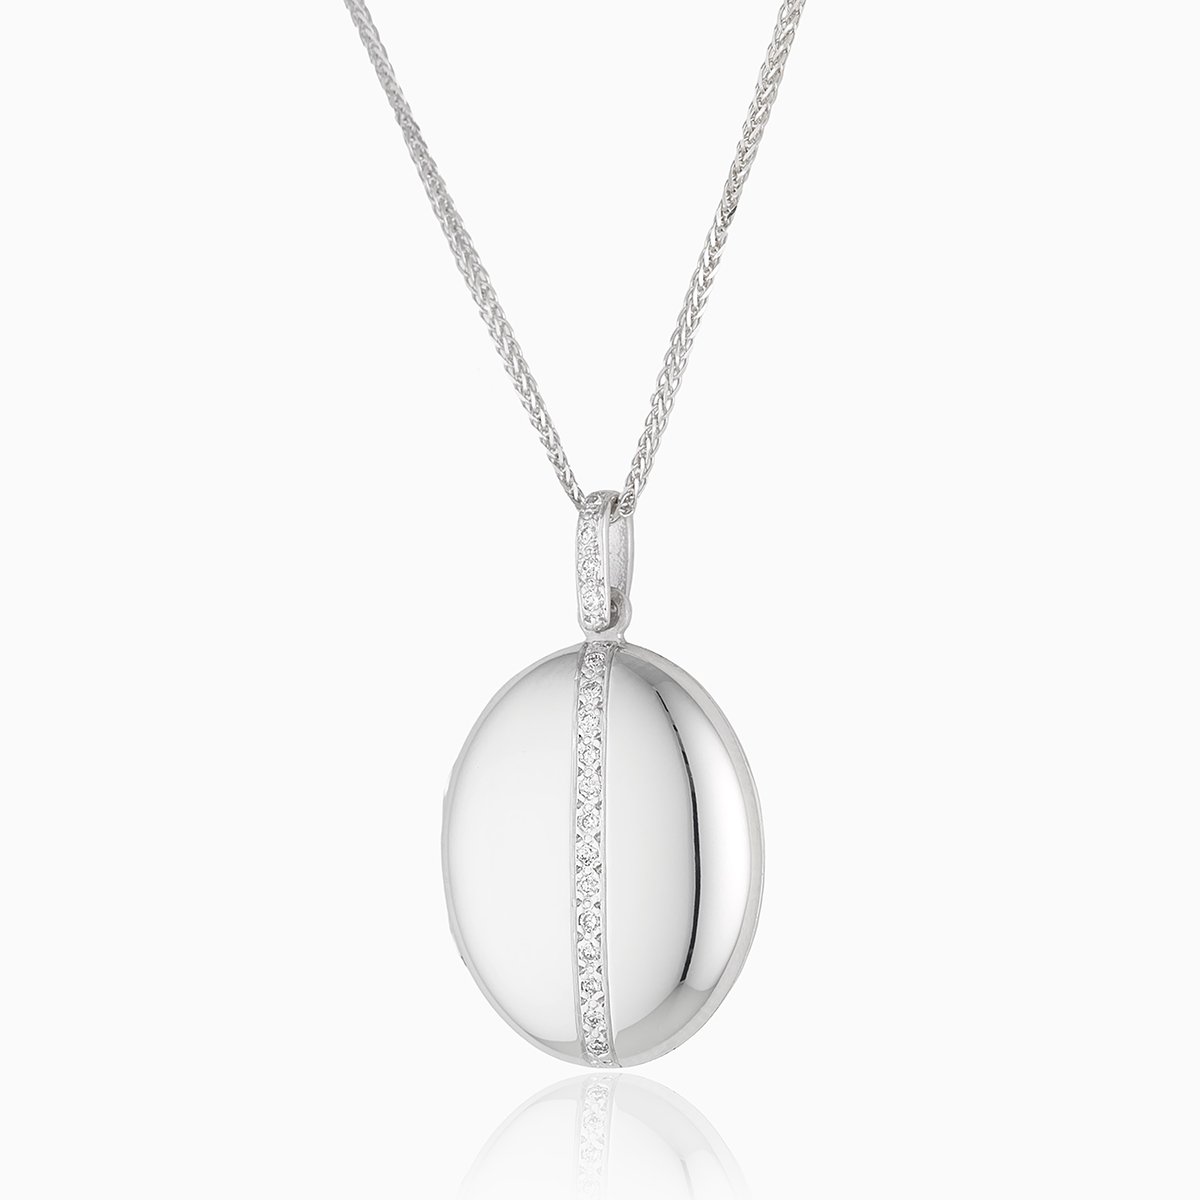 18 ct white gold oval locket set with a vertical line of diamonds. The bail is also set with diamonds. On an 18 ct white gold franco chain